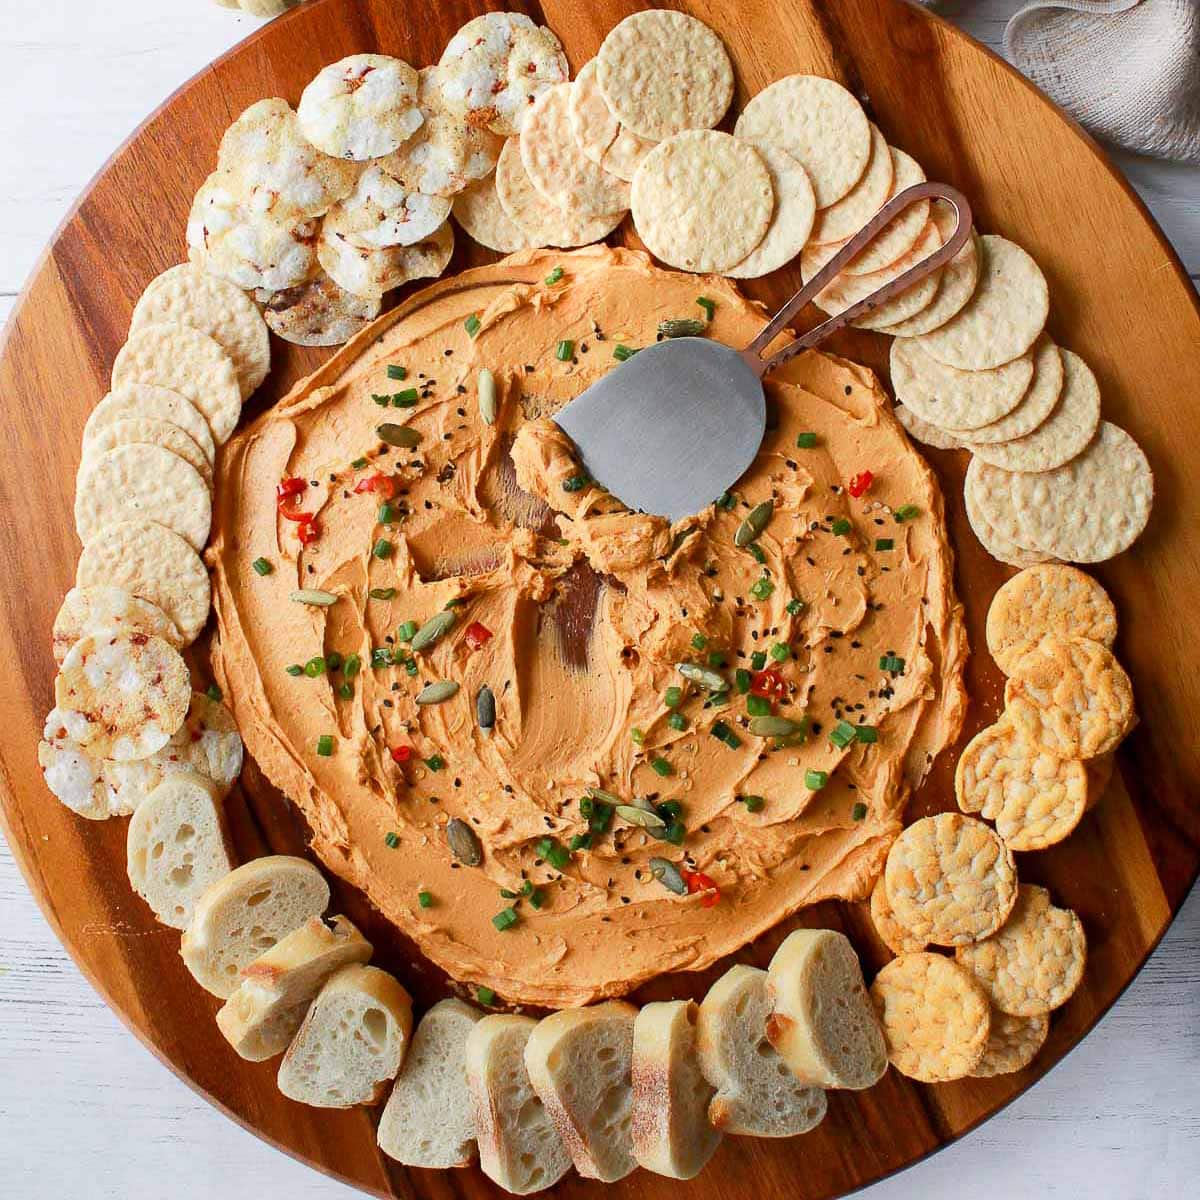 a miso butter board on a round wooden board surrounded by crackers and bread with baby pumpkins and a napkin on the side